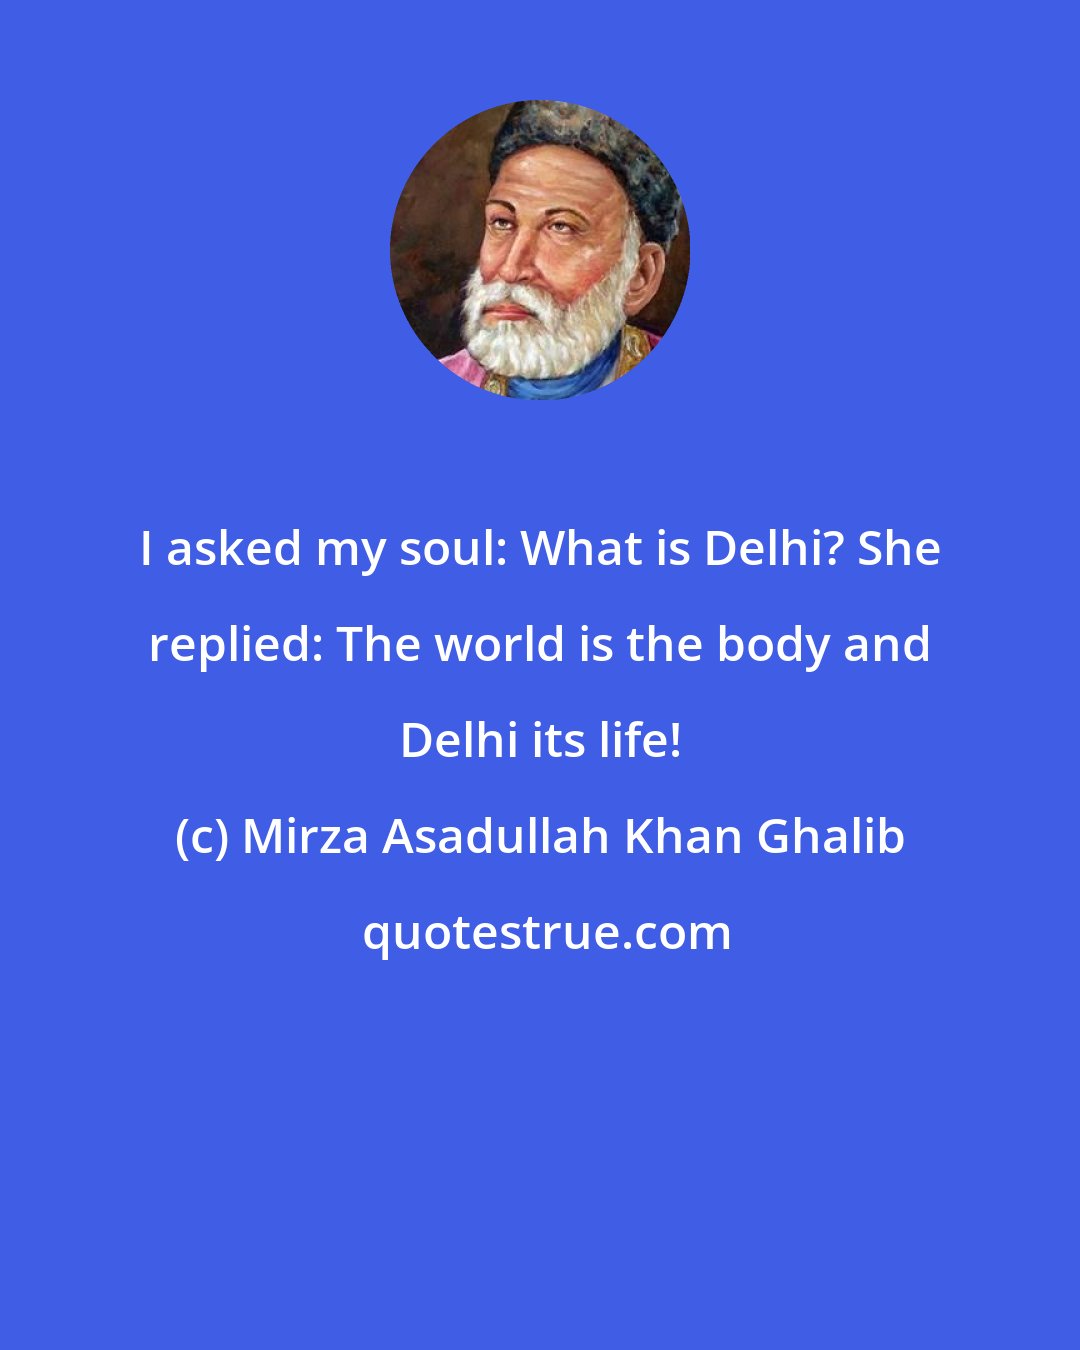 Mirza Asadullah Khan Ghalib: I asked my soul: What is Delhi? She replied: The world is the body and Delhi its life!